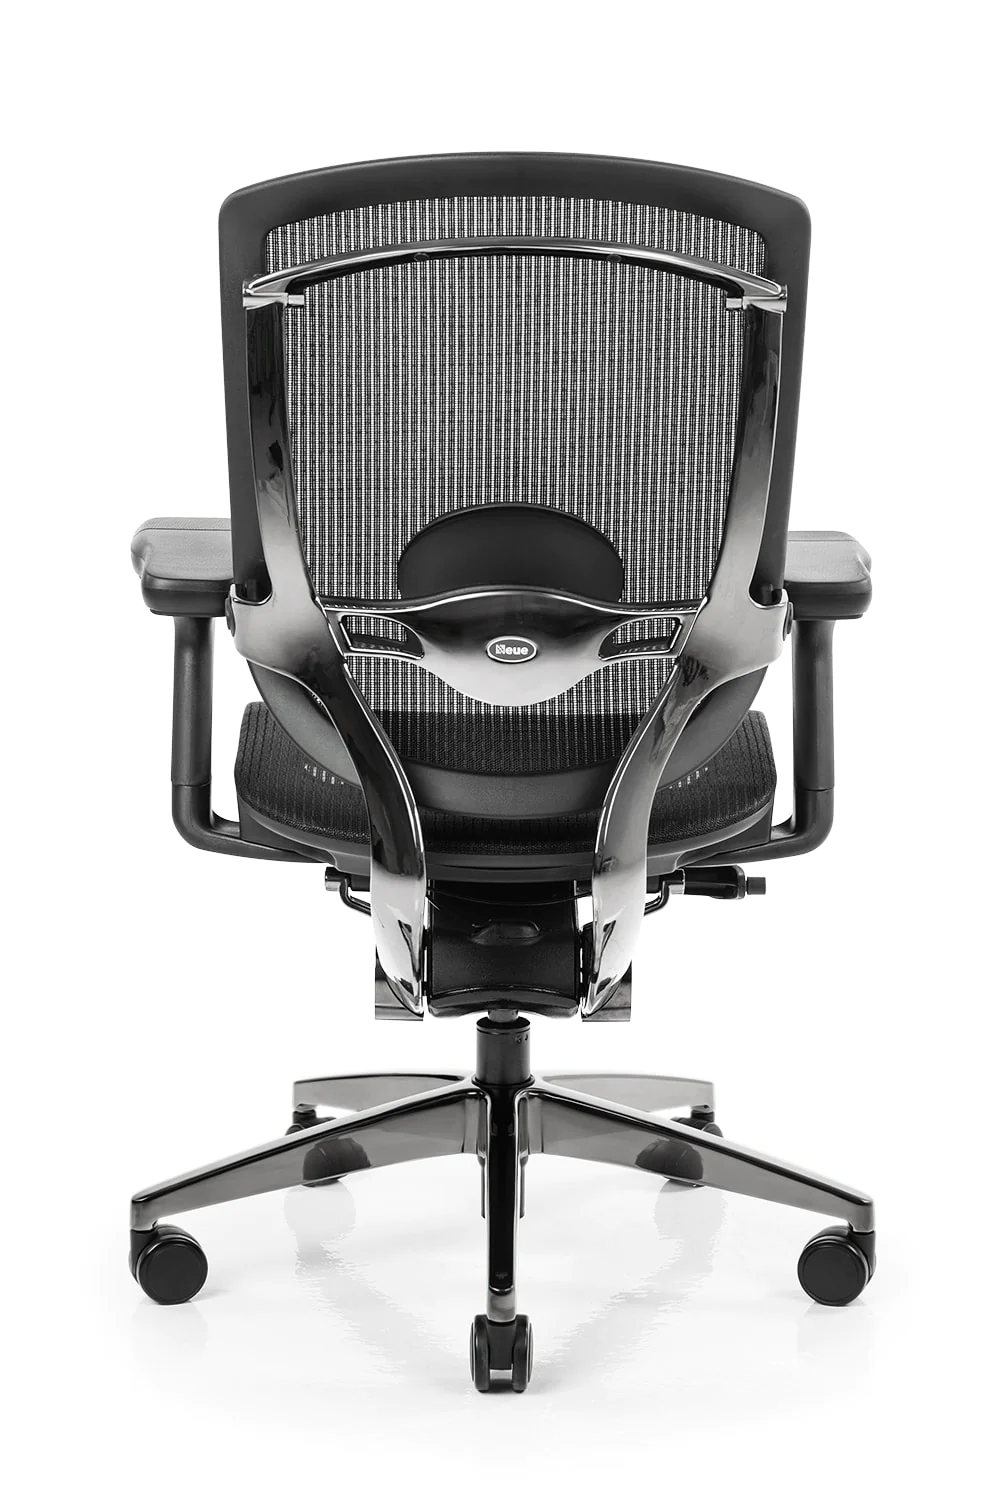 ergonomic office and gaming desk accessories chair ideas.